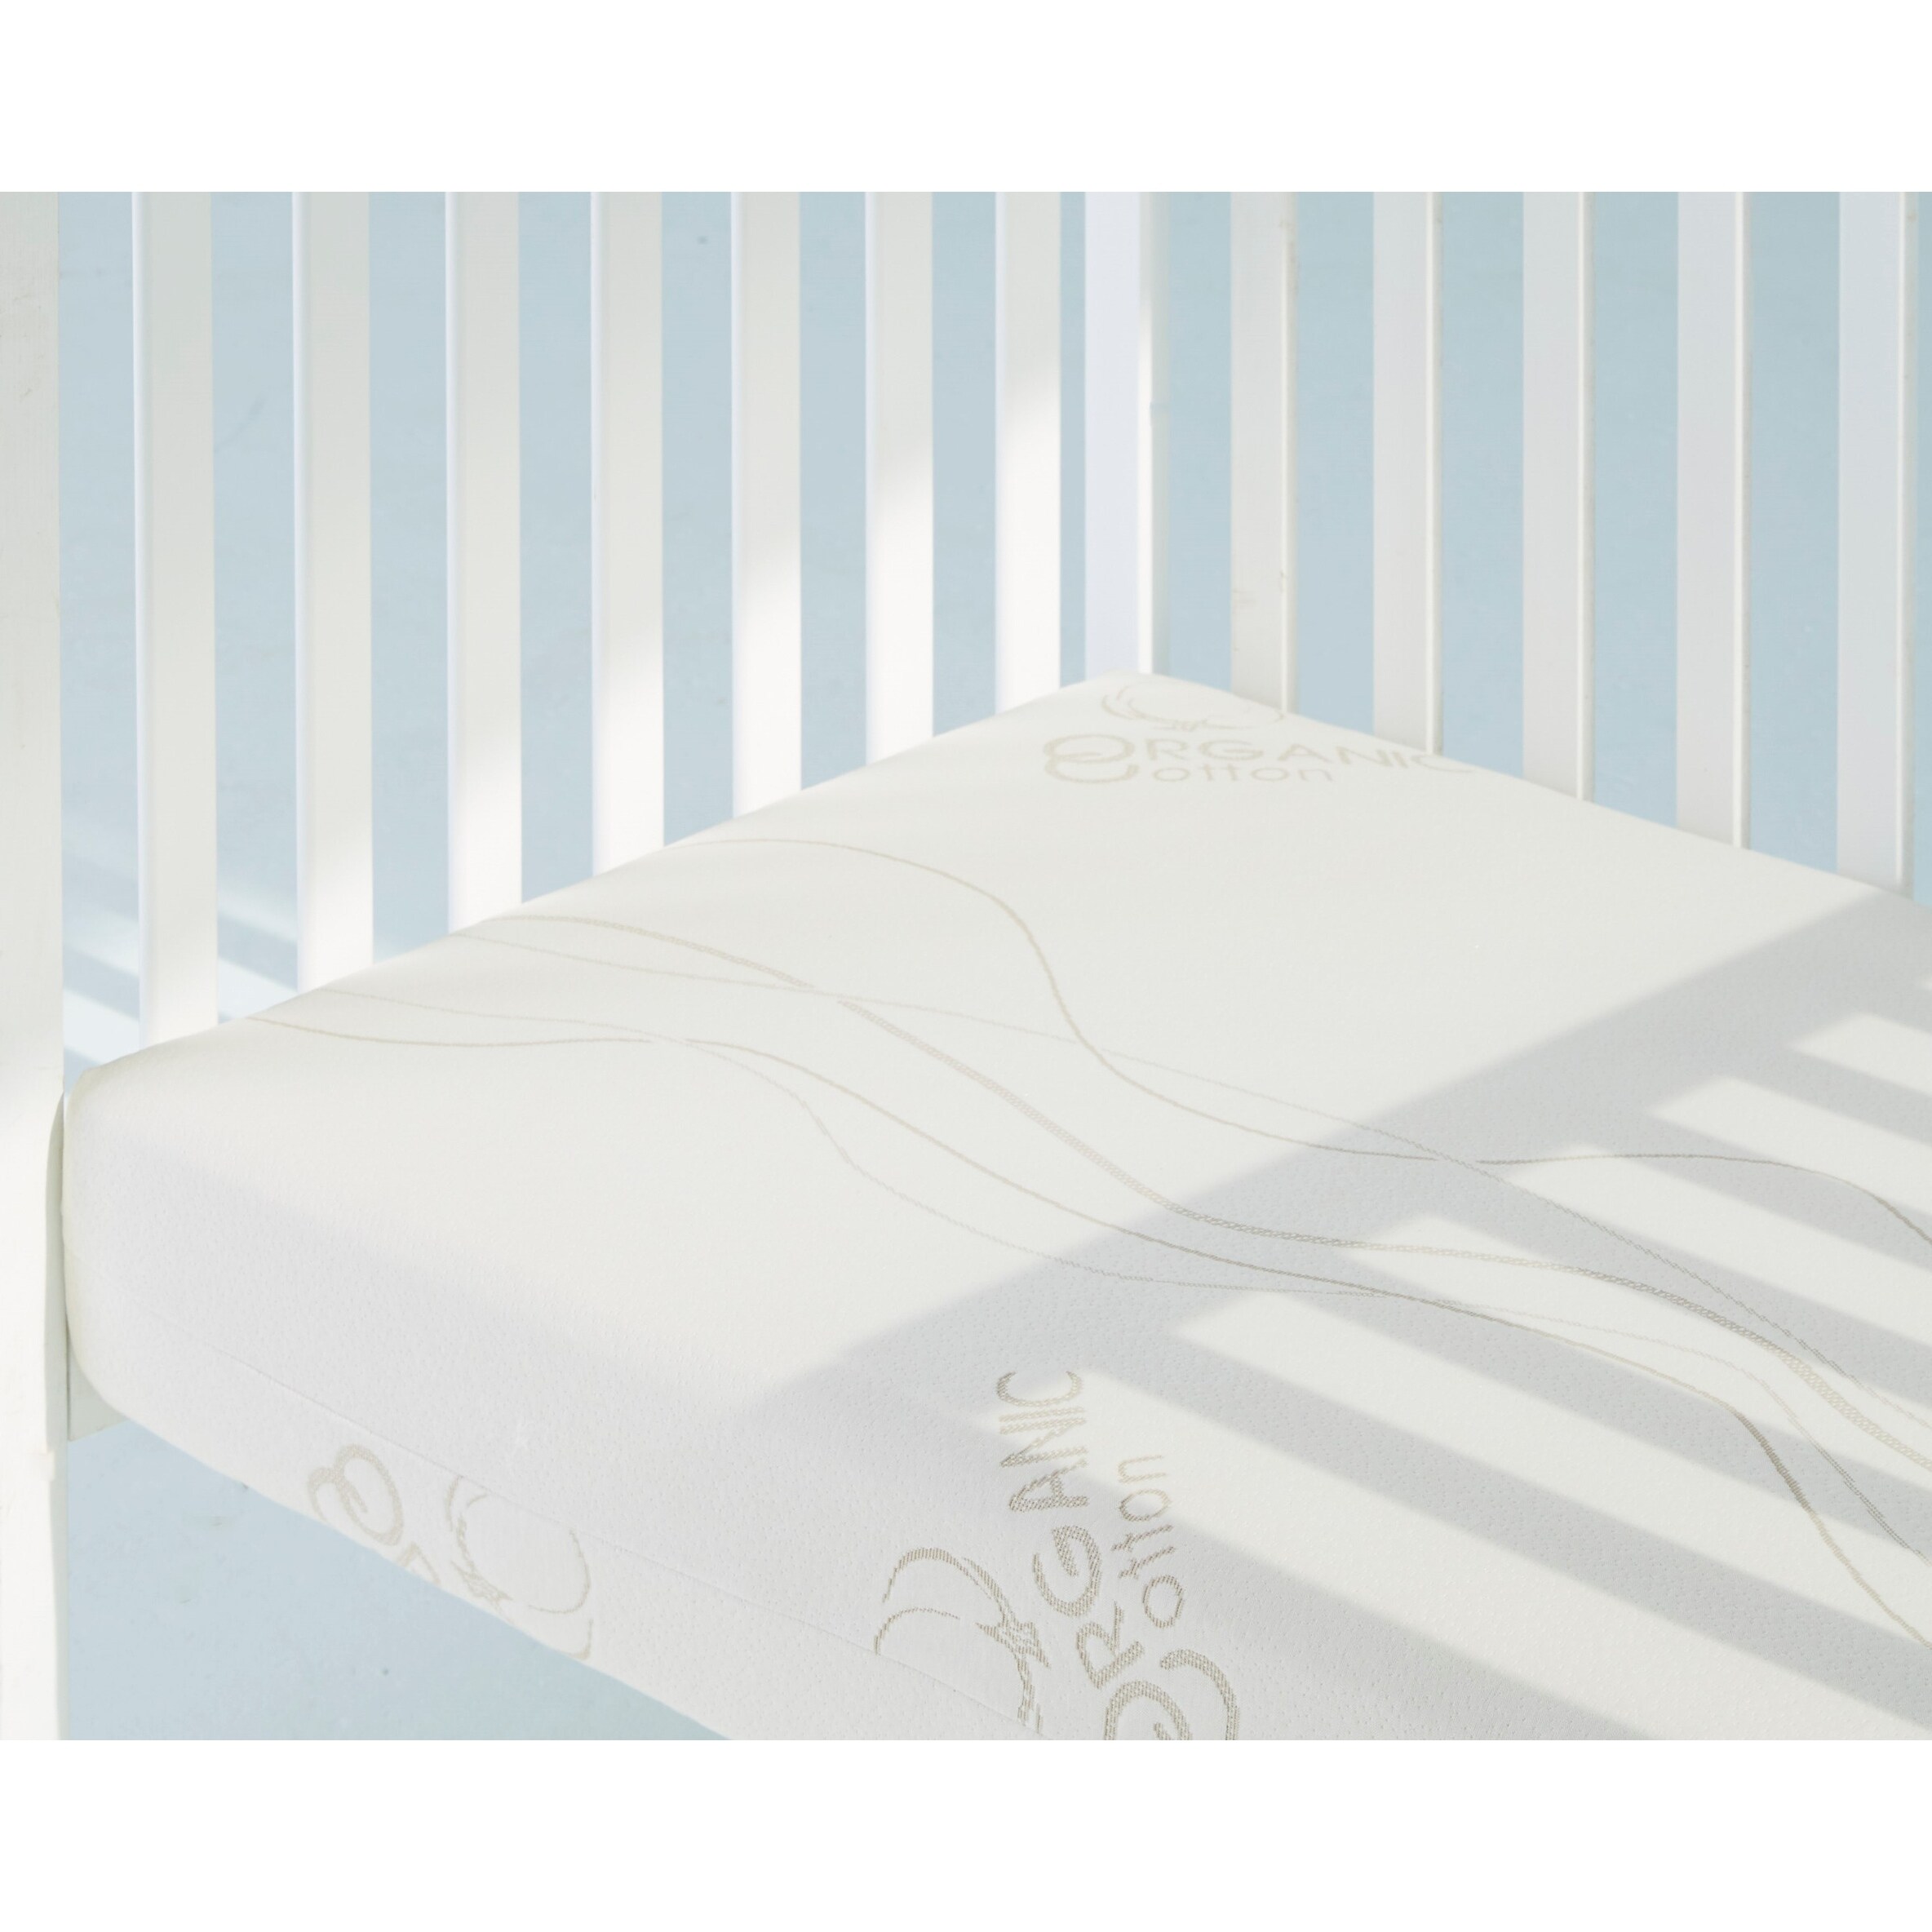 Hypoallergenic 100% Breathable Bundle of Dreams Classic 2-Stage Crib & Toddler Bed Mattress Eco-Friendly Edge Support Organic Cotton Cover 